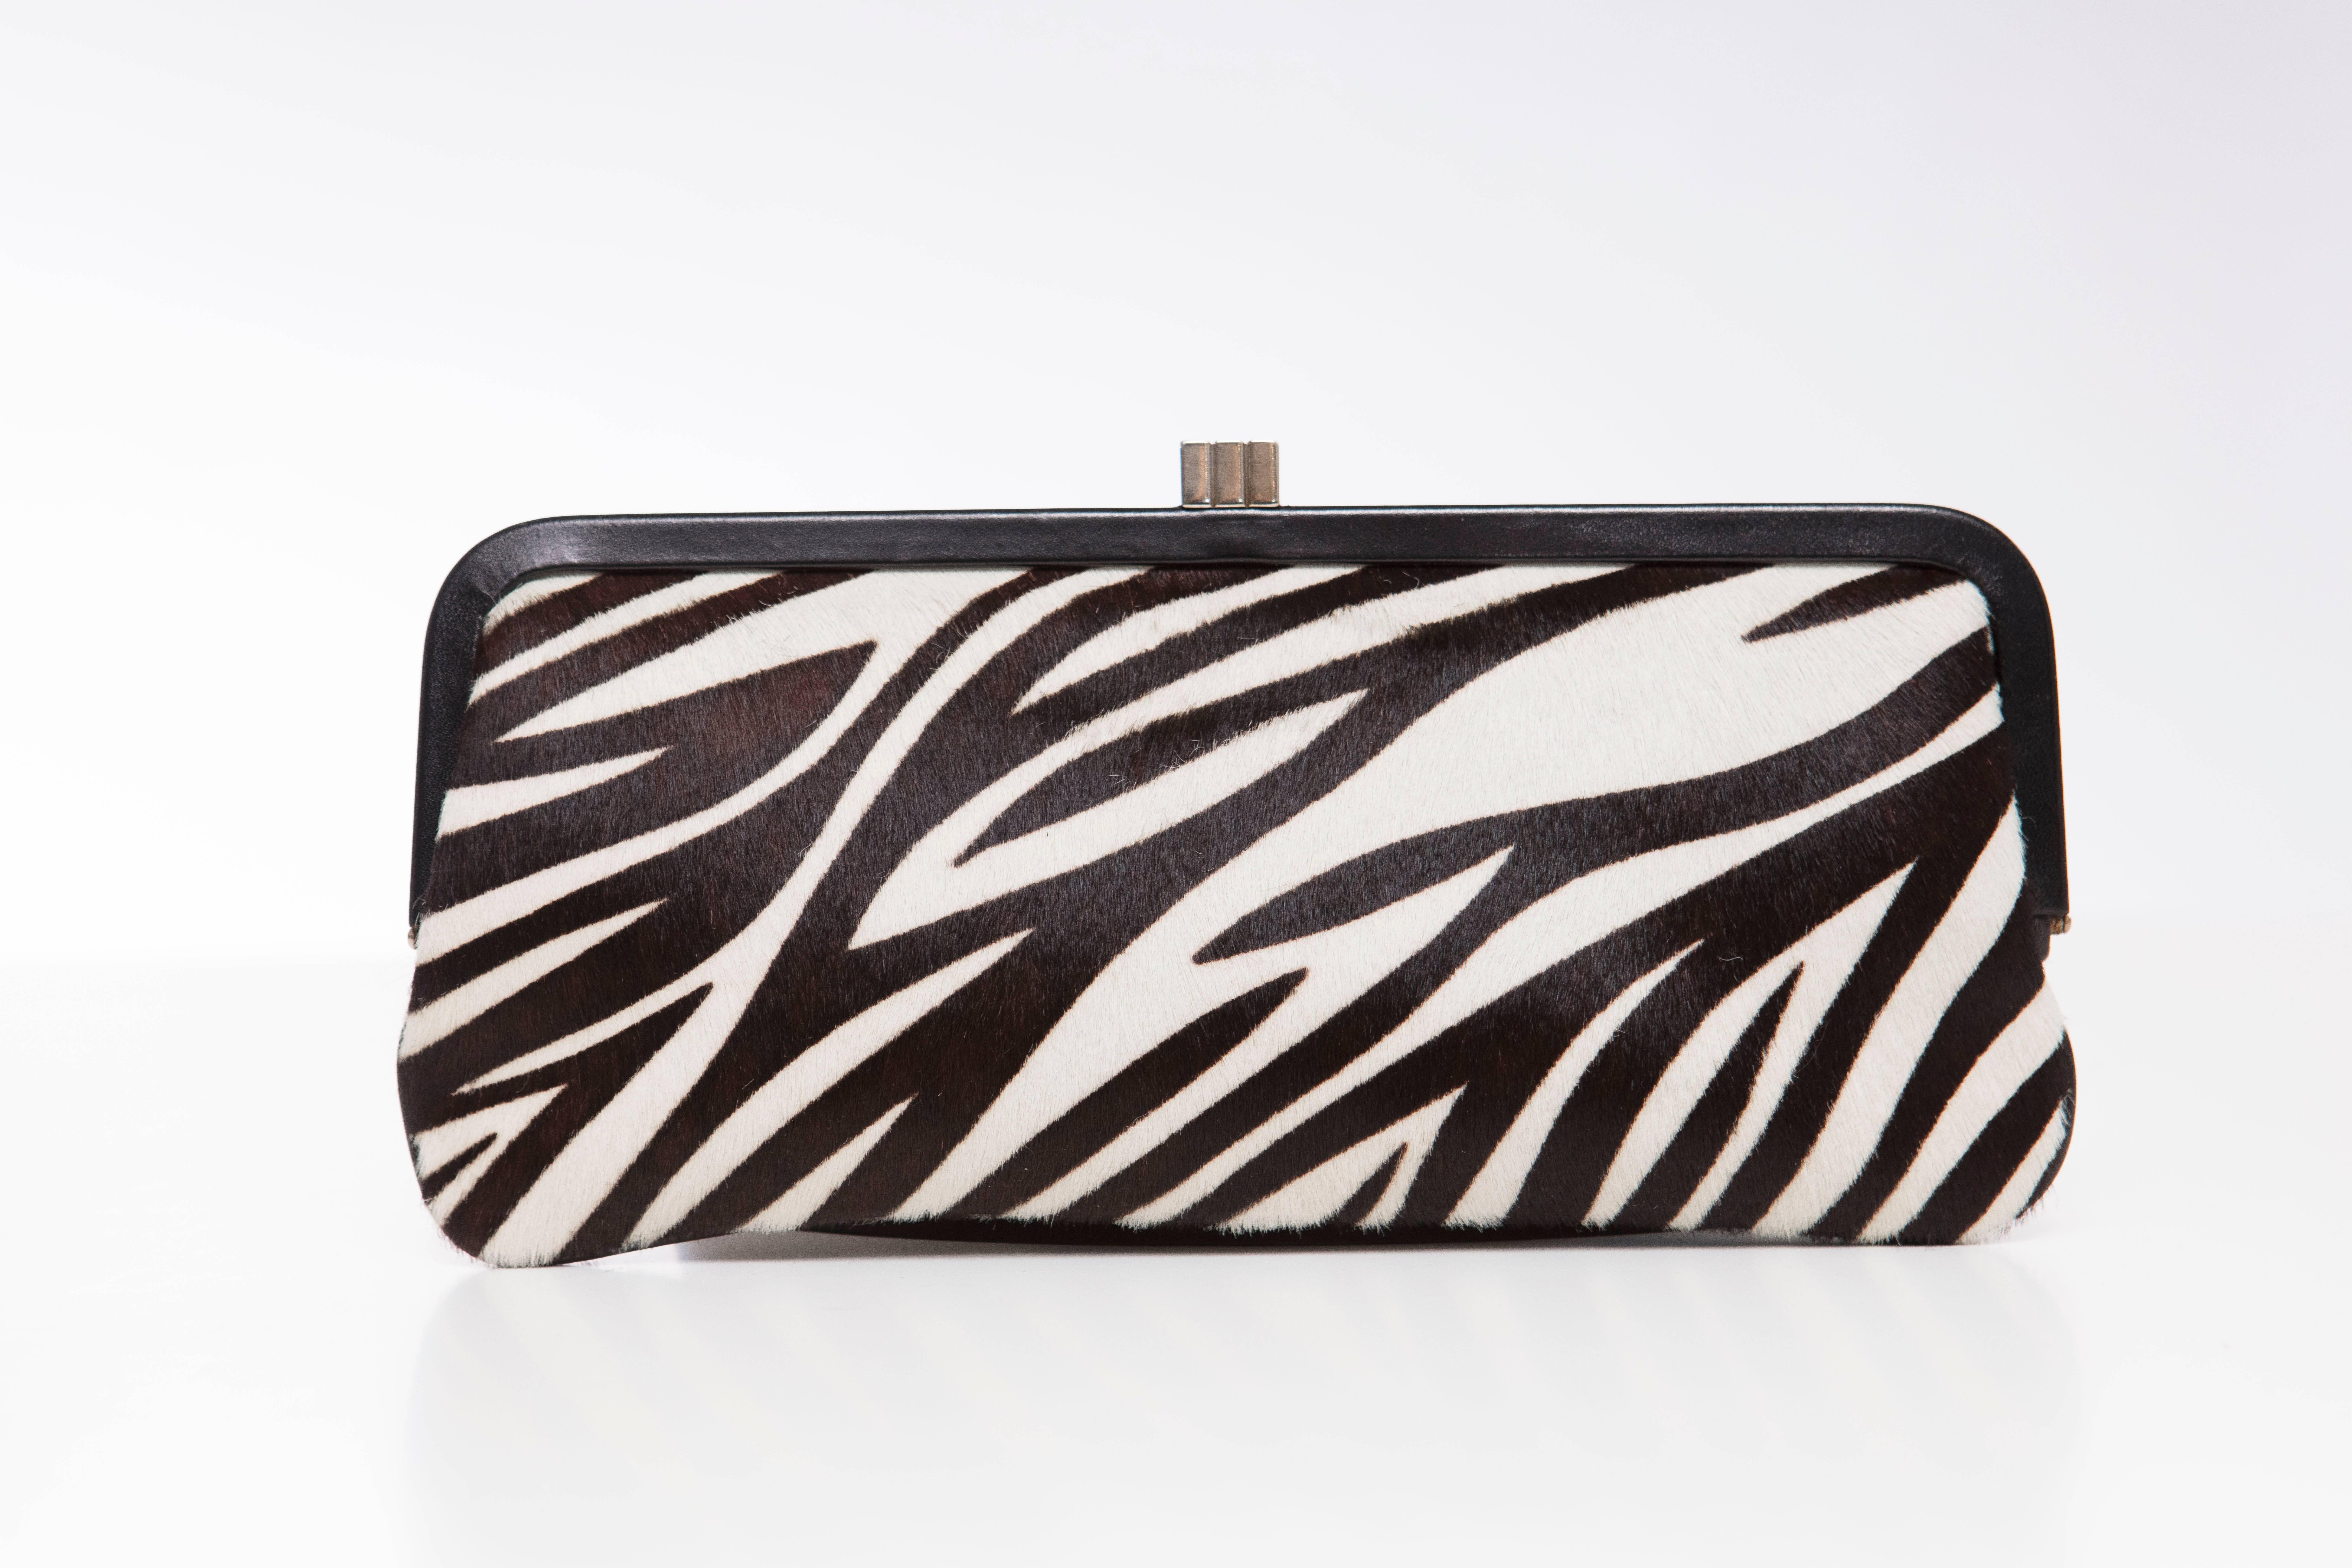 Lambertson Truex black and white zebra print pony hair clutch with silver-tone hardware, black leather trim, blue leather interior, single pocket at interior wall with zip closure and push-lock closure at top.

Height: 4.5, Width 10, Depth 0.25



